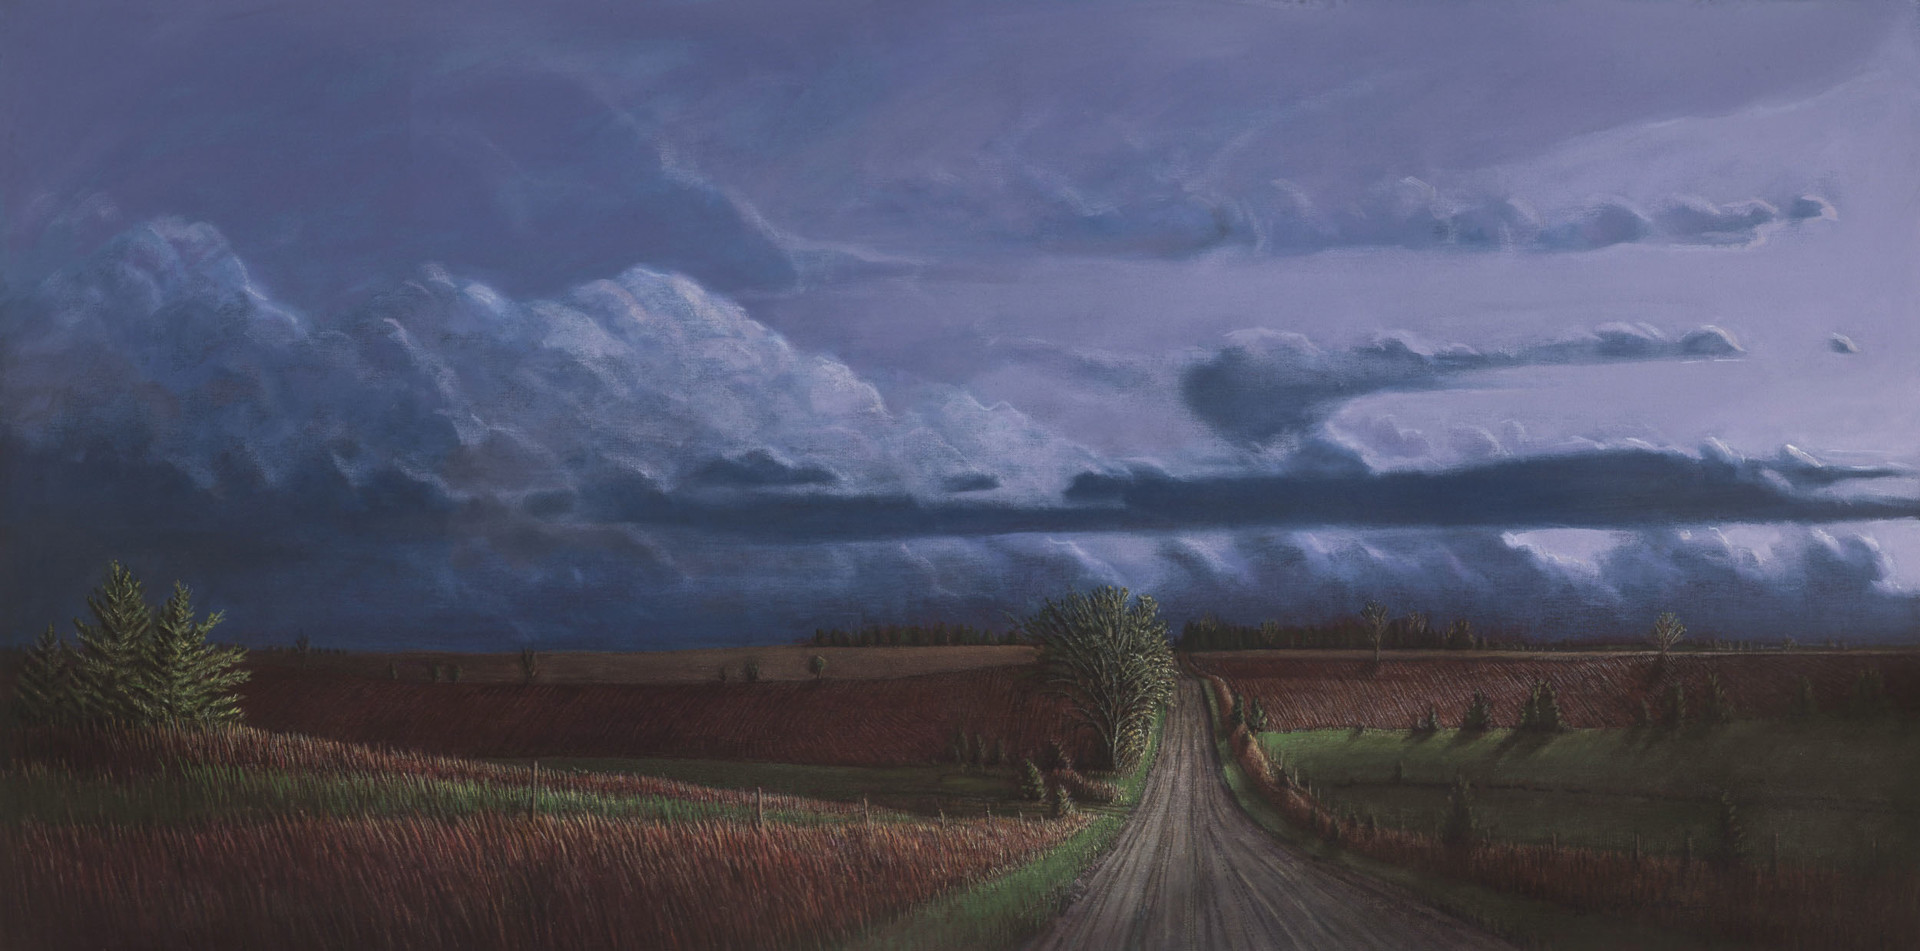 Horizon 1179 - "Late Afternoon Storm, Seward County" by Anne Burkholder